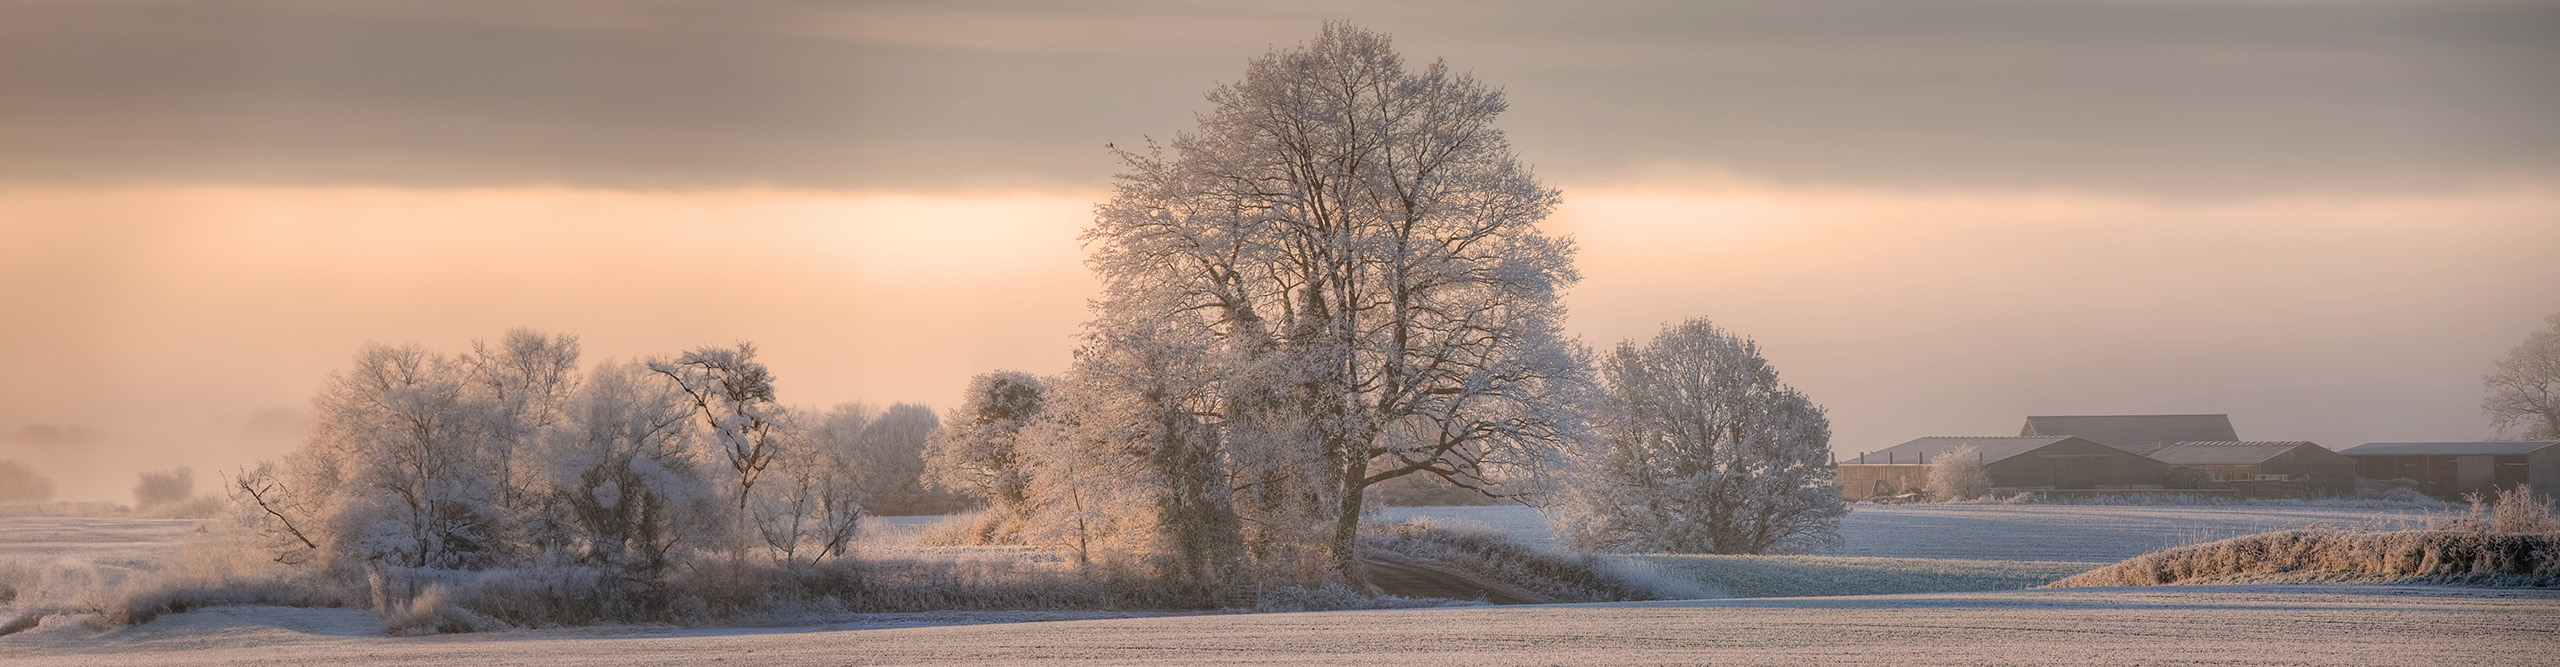 Snow in the fields and on the trees in the Cotswolds countryside, England 